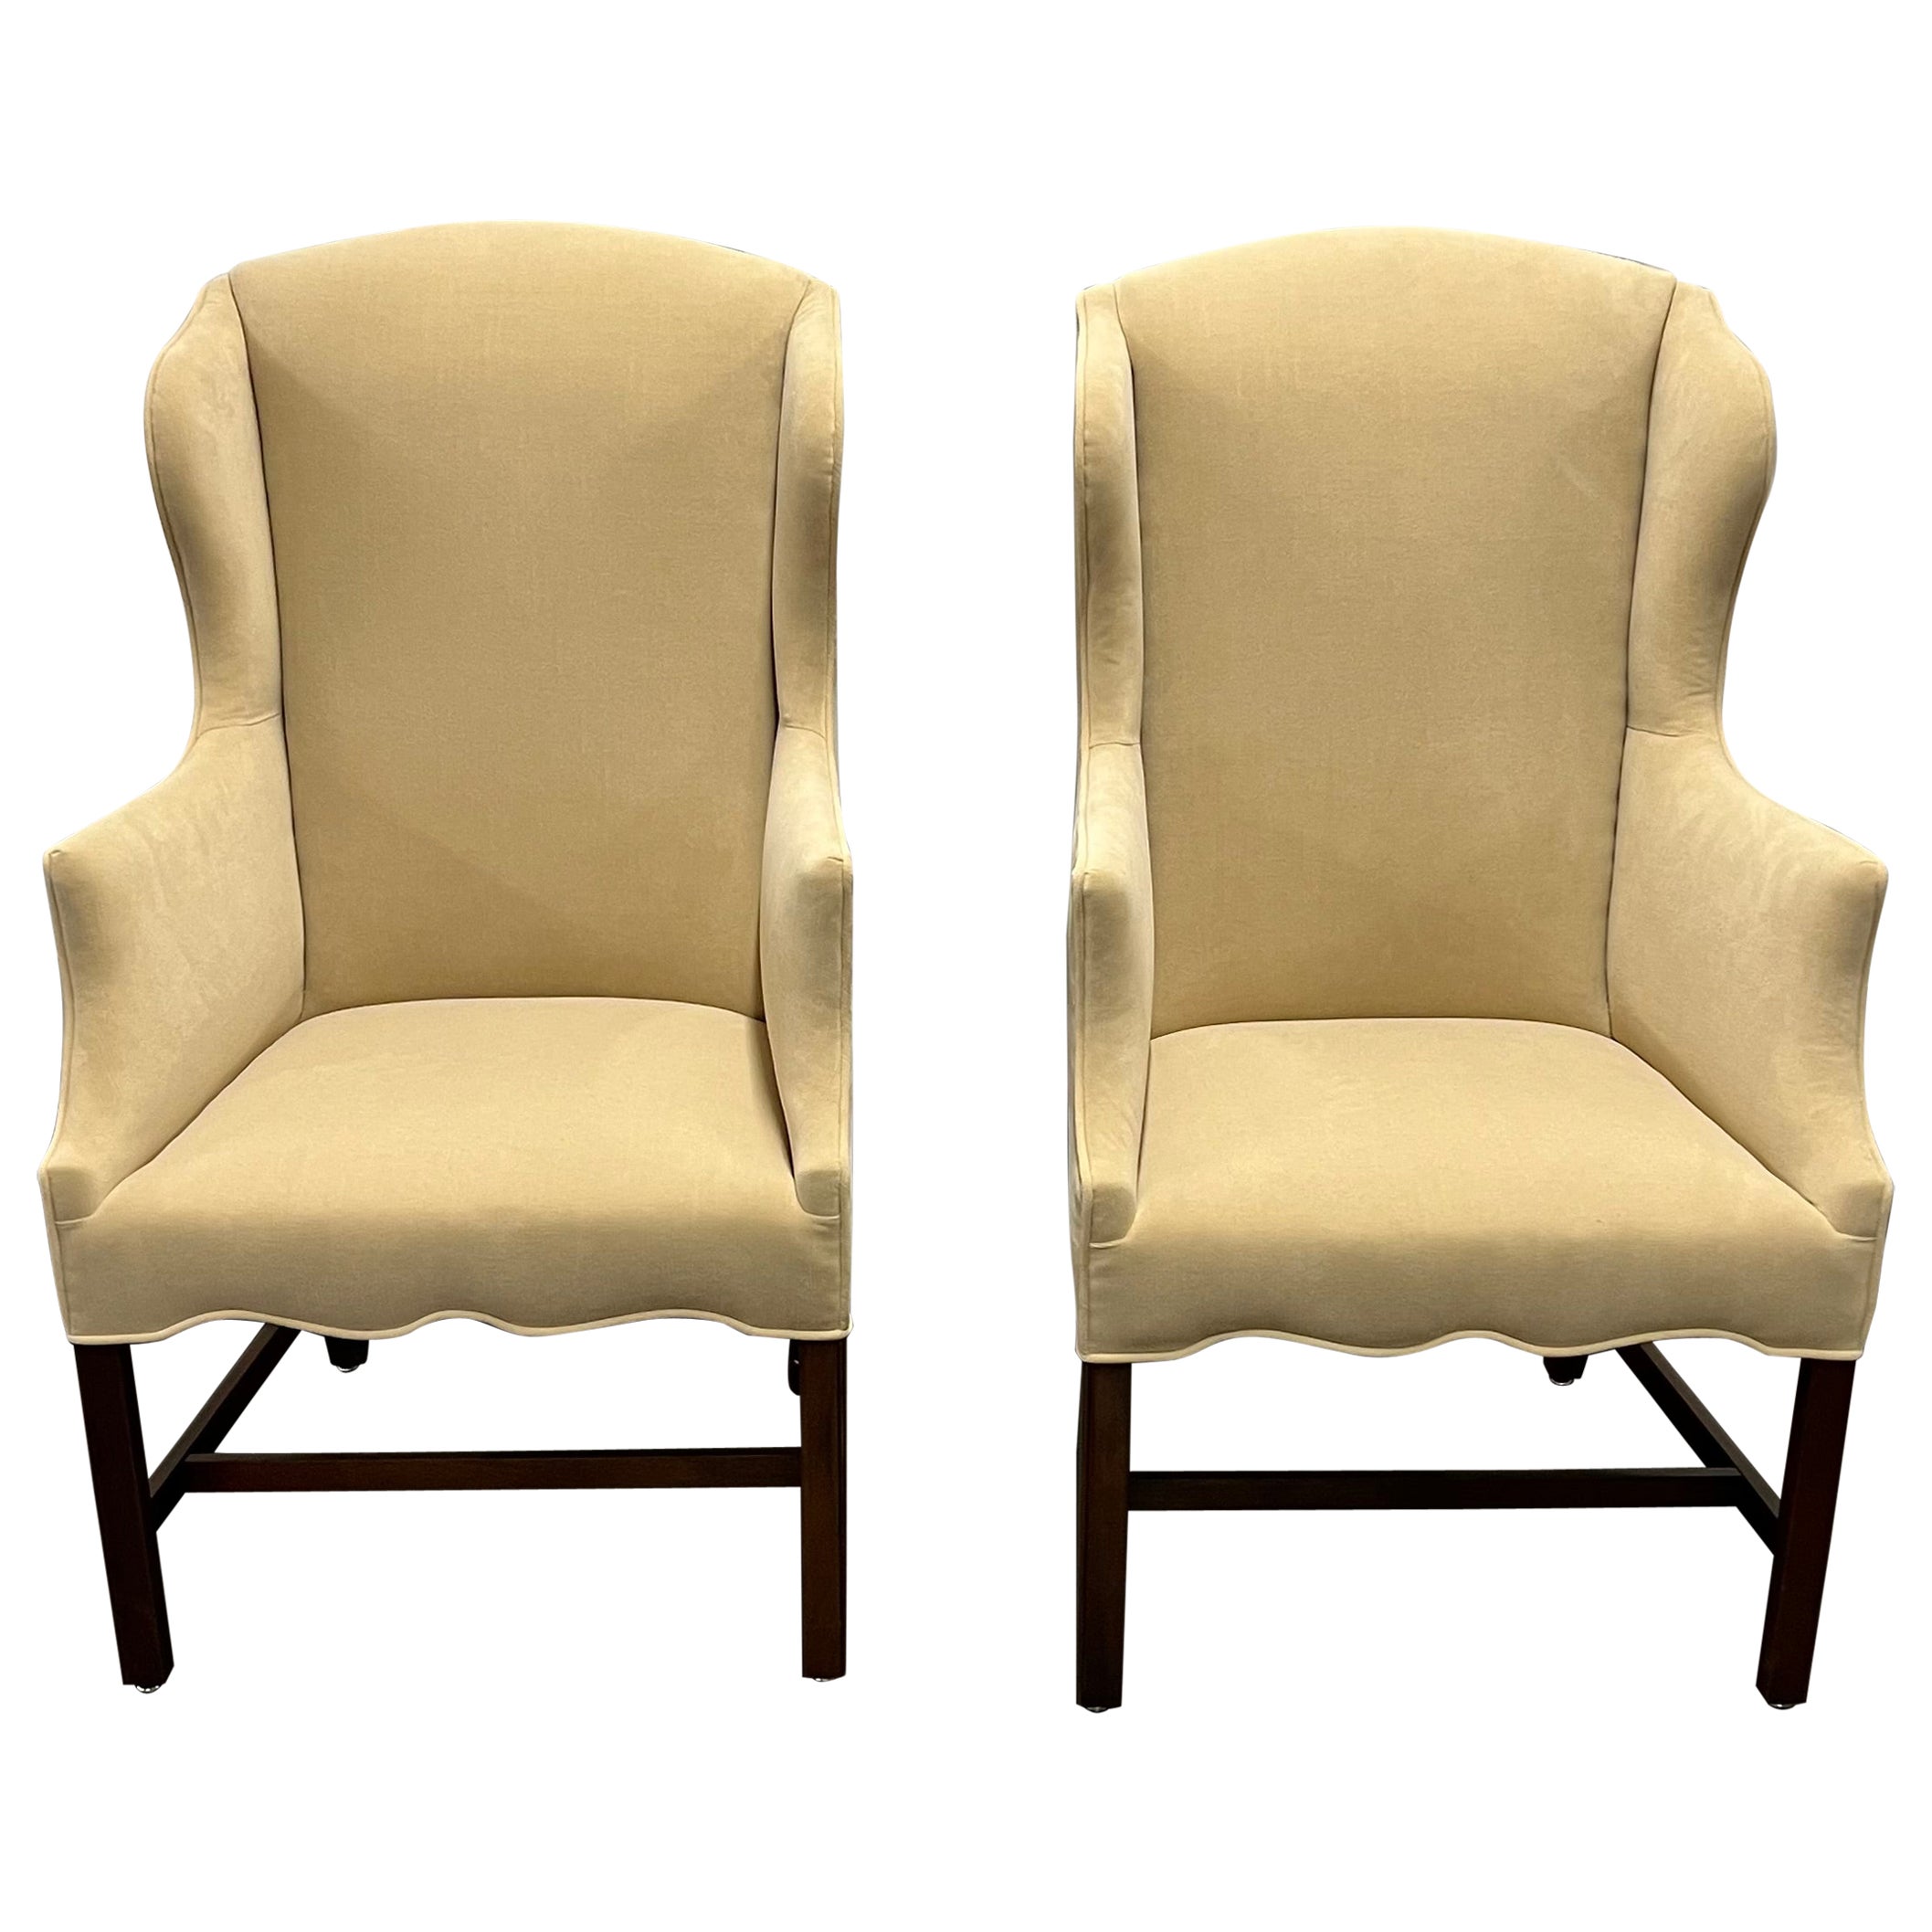 Pair of Slim Midcentury Chippendale Style Wingback Chairs